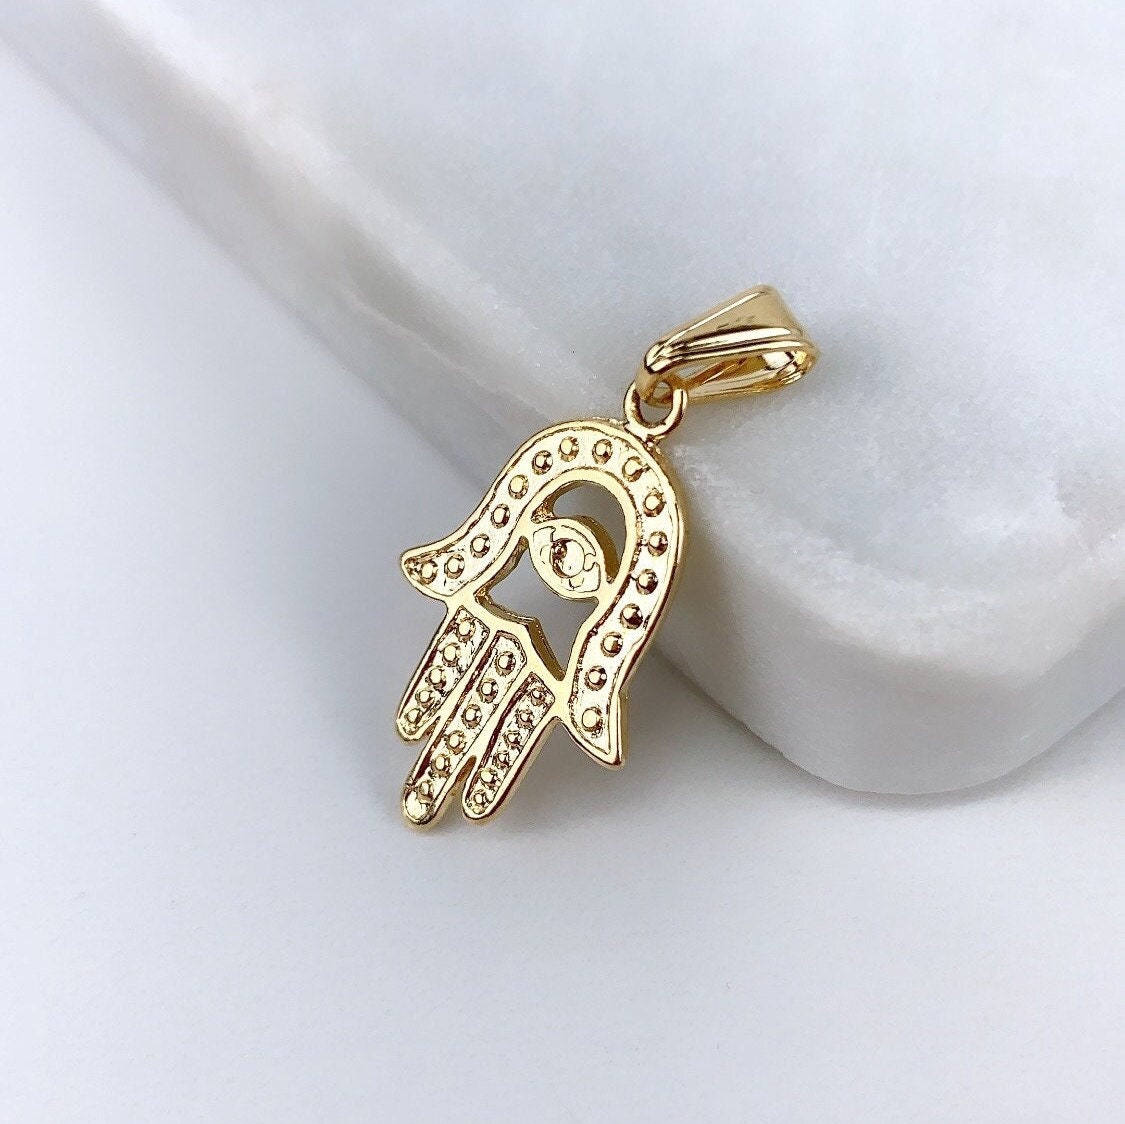 18k Gold Filled Texturized Cutout Hamsa Hand, Hand of God Shape Design Pendant Charms, Lucky Protection, Wholesale Jewelry Making Supplies